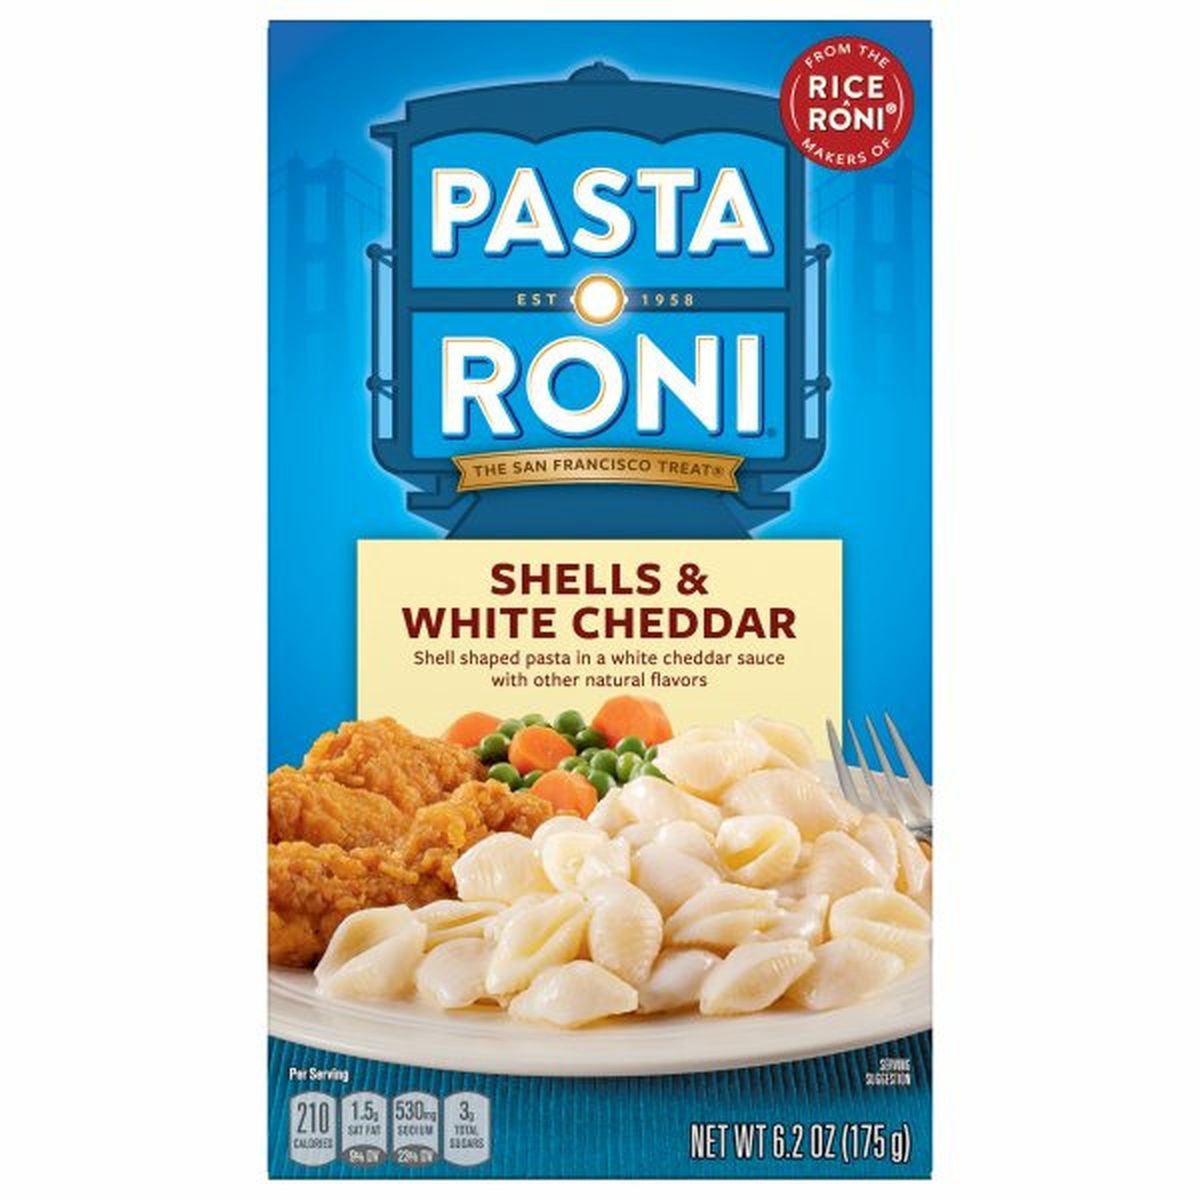 Calories in Pasta Roni Shells & White Cheddar